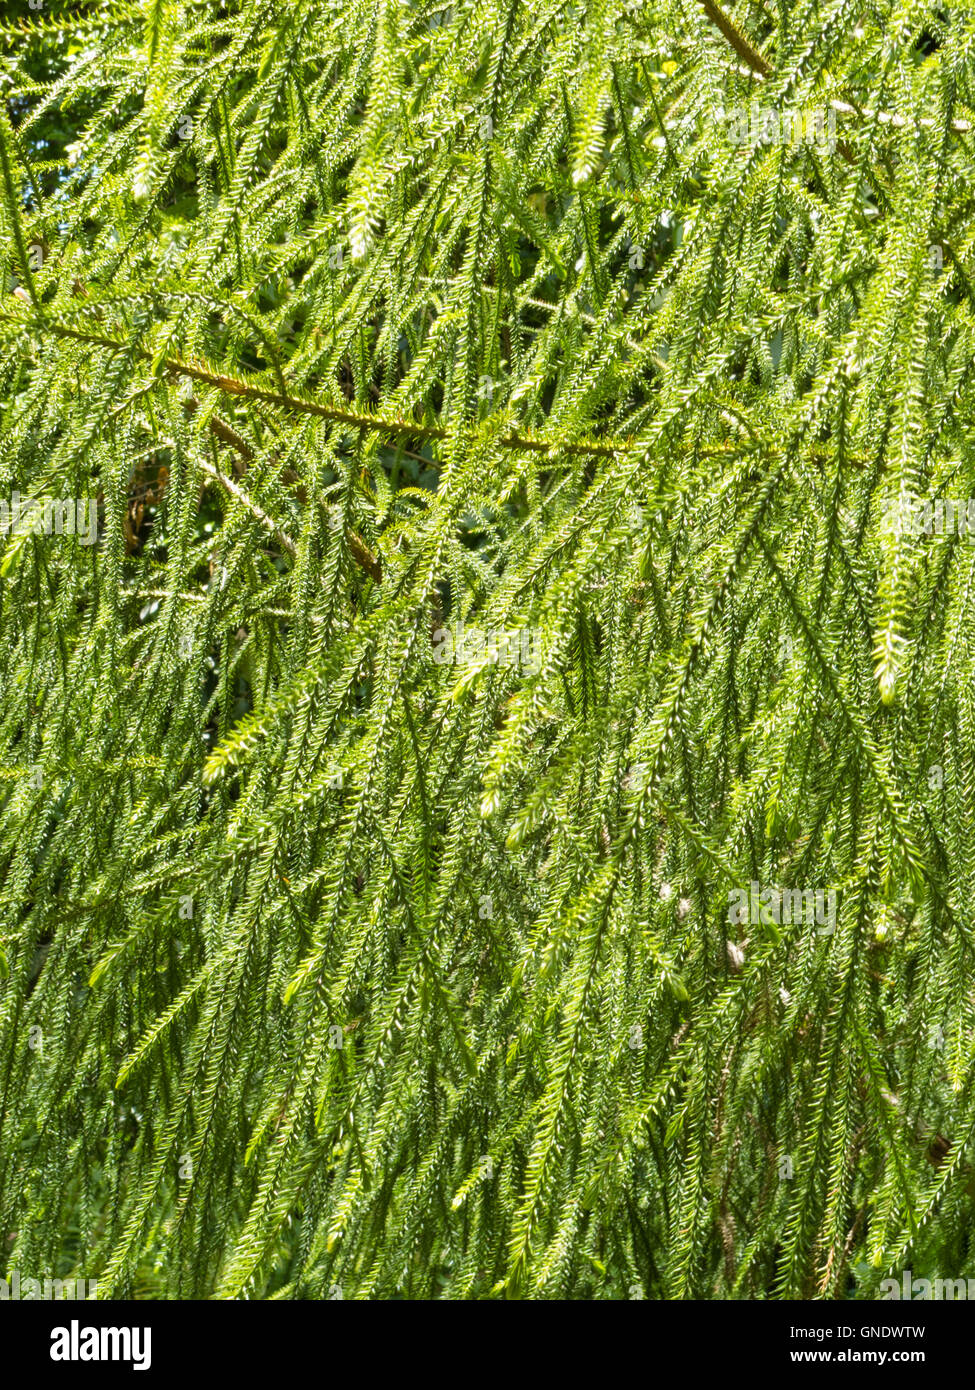 Leaves of NZ Rimu tree background texture pattern Stock Photo